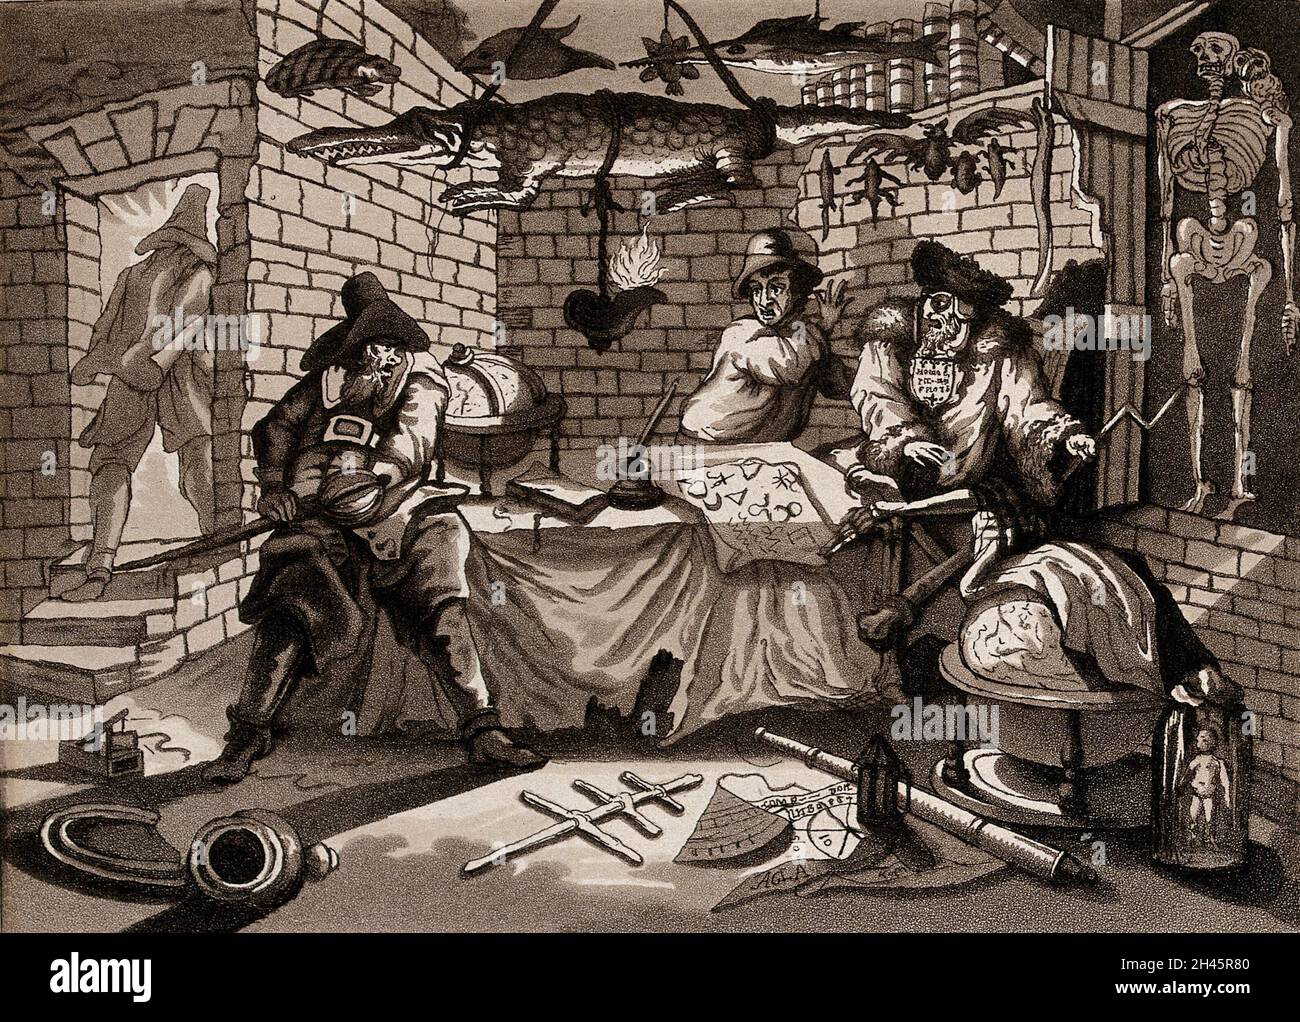 In a chamber containing stuffed animals, a globe and astrological devices Hudibras, about to draw his sword, startles Sidrophel and Whacum. Aquatint by C. Rosenberg, 1799, after William Hogarth. Stock Photo